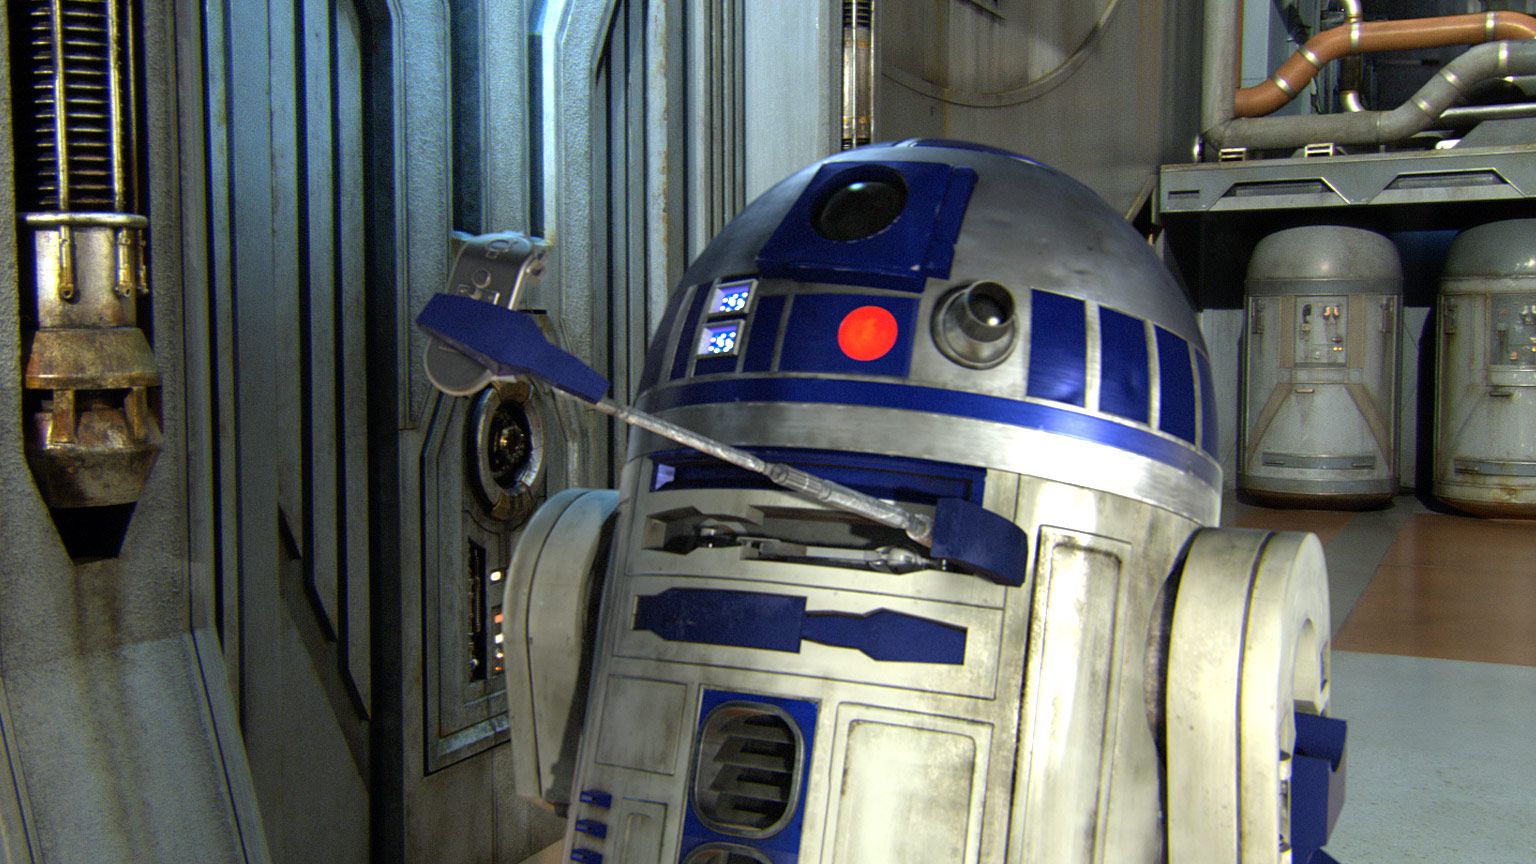 R2-D2 speaks with Obi-Wan and Anakin in Revenge of the Sith